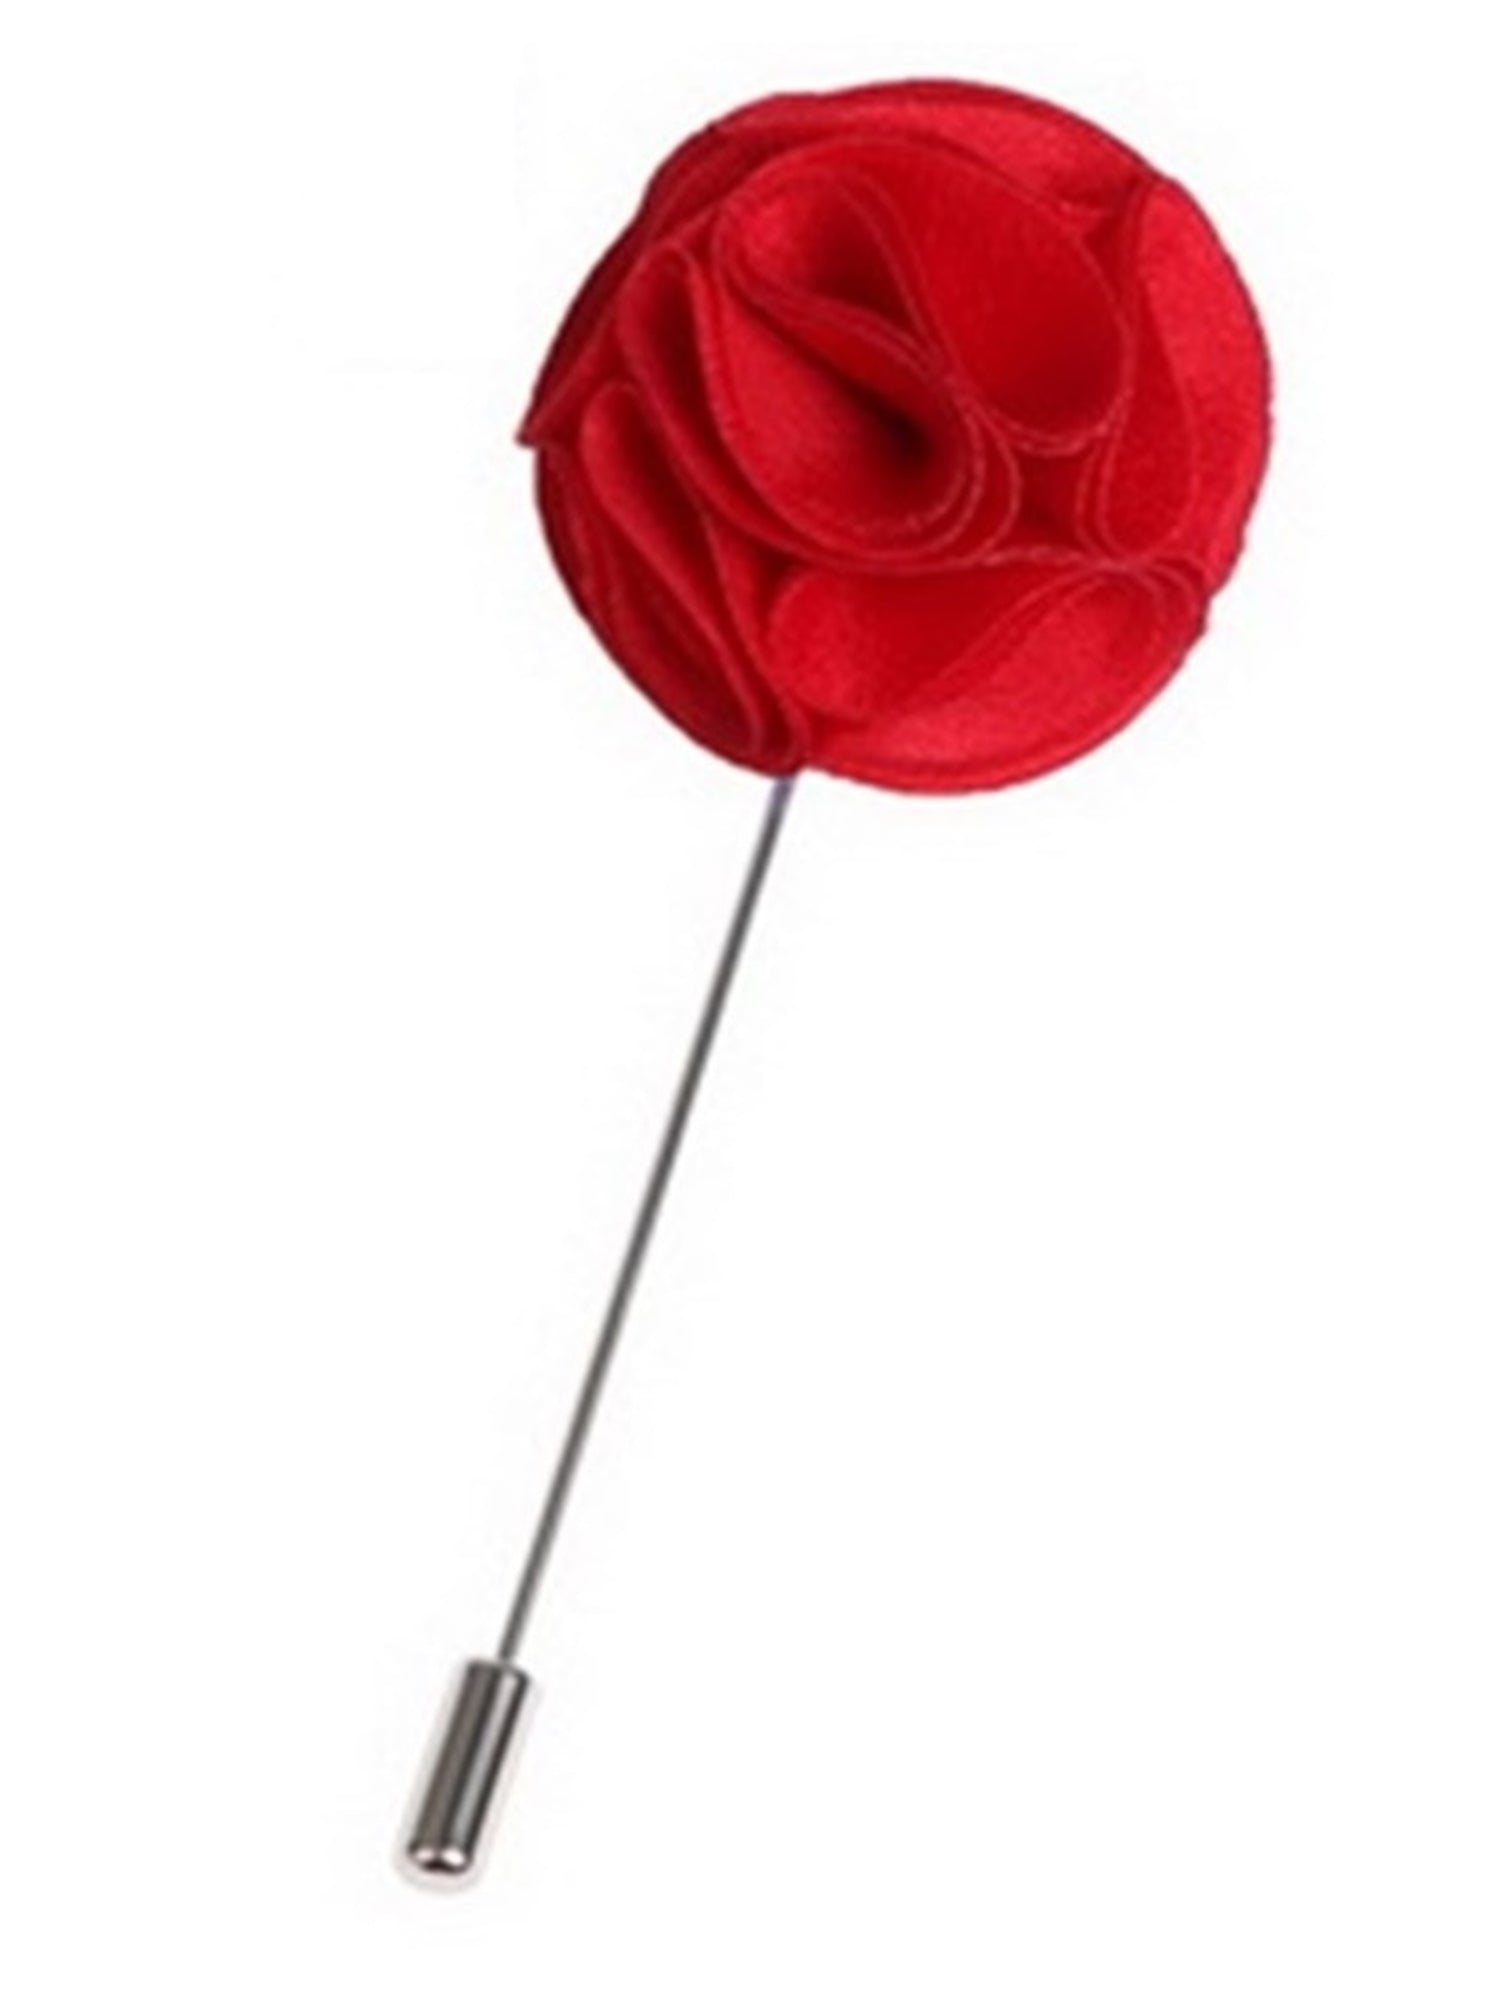 Men's Rose Flower Lapel Pin Boutonniere For Suit Lapel price TheDapperTie Red Regular 